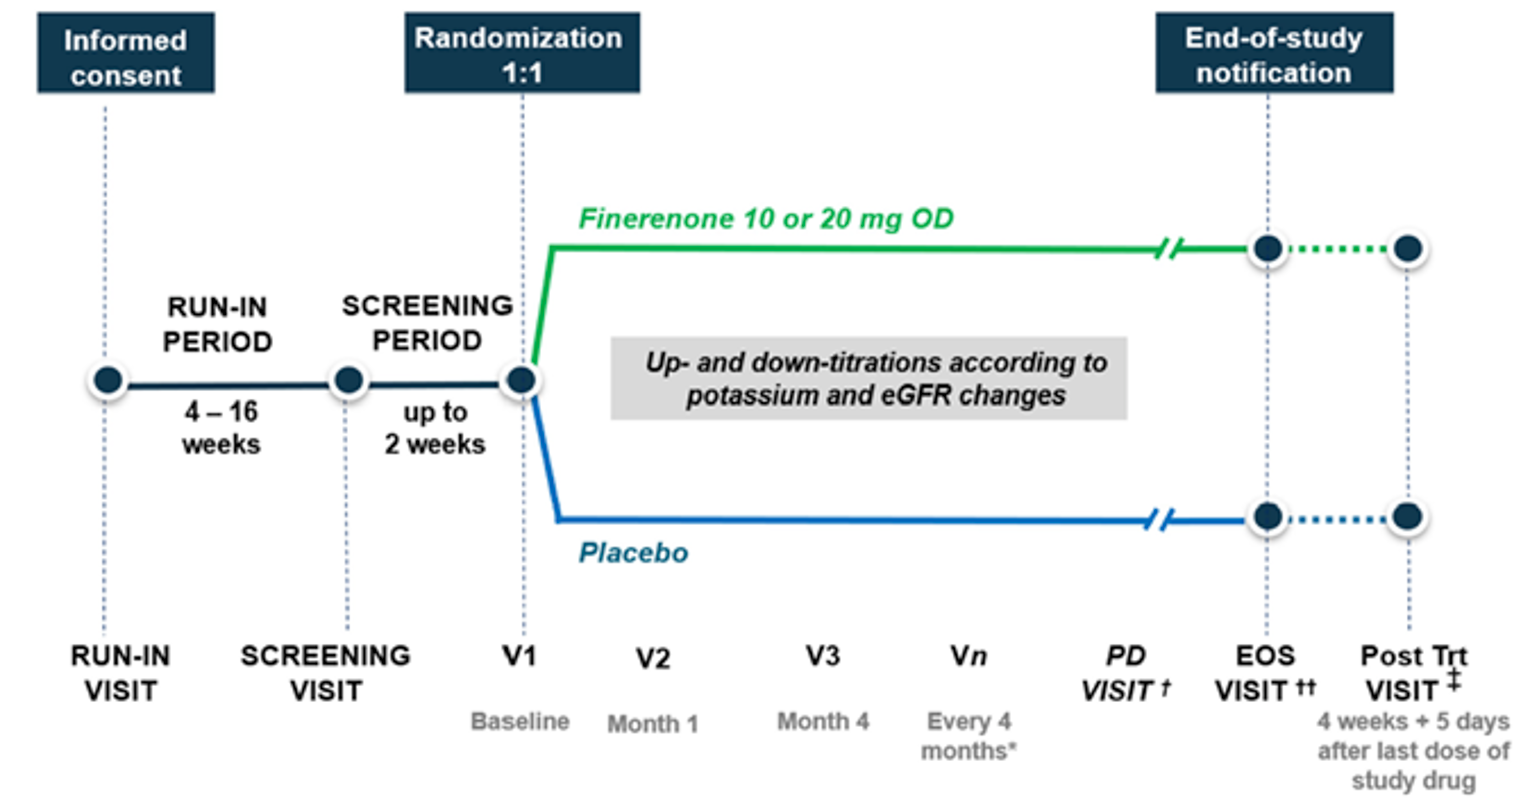 This figure summarizes the overall design of the FIDELIO and FIGARO trials. Patients meeting the eligibility criteria signed an informed consent at the run-in visit and underwent a run-in period of 4 weeks to 16 weeks, then a screening visit, after which they underwent a screening period of up to 2 weeks. At the first visit, patients were randomized 1:1 to finerenone 10 mg or 20 mg once daily or placebo. There was a monthly visit until month 4, followed by a visit every 4 months until the end-of-study visit. A posttreatment visit was conducted 4 weeks after the last dose of the study drug.